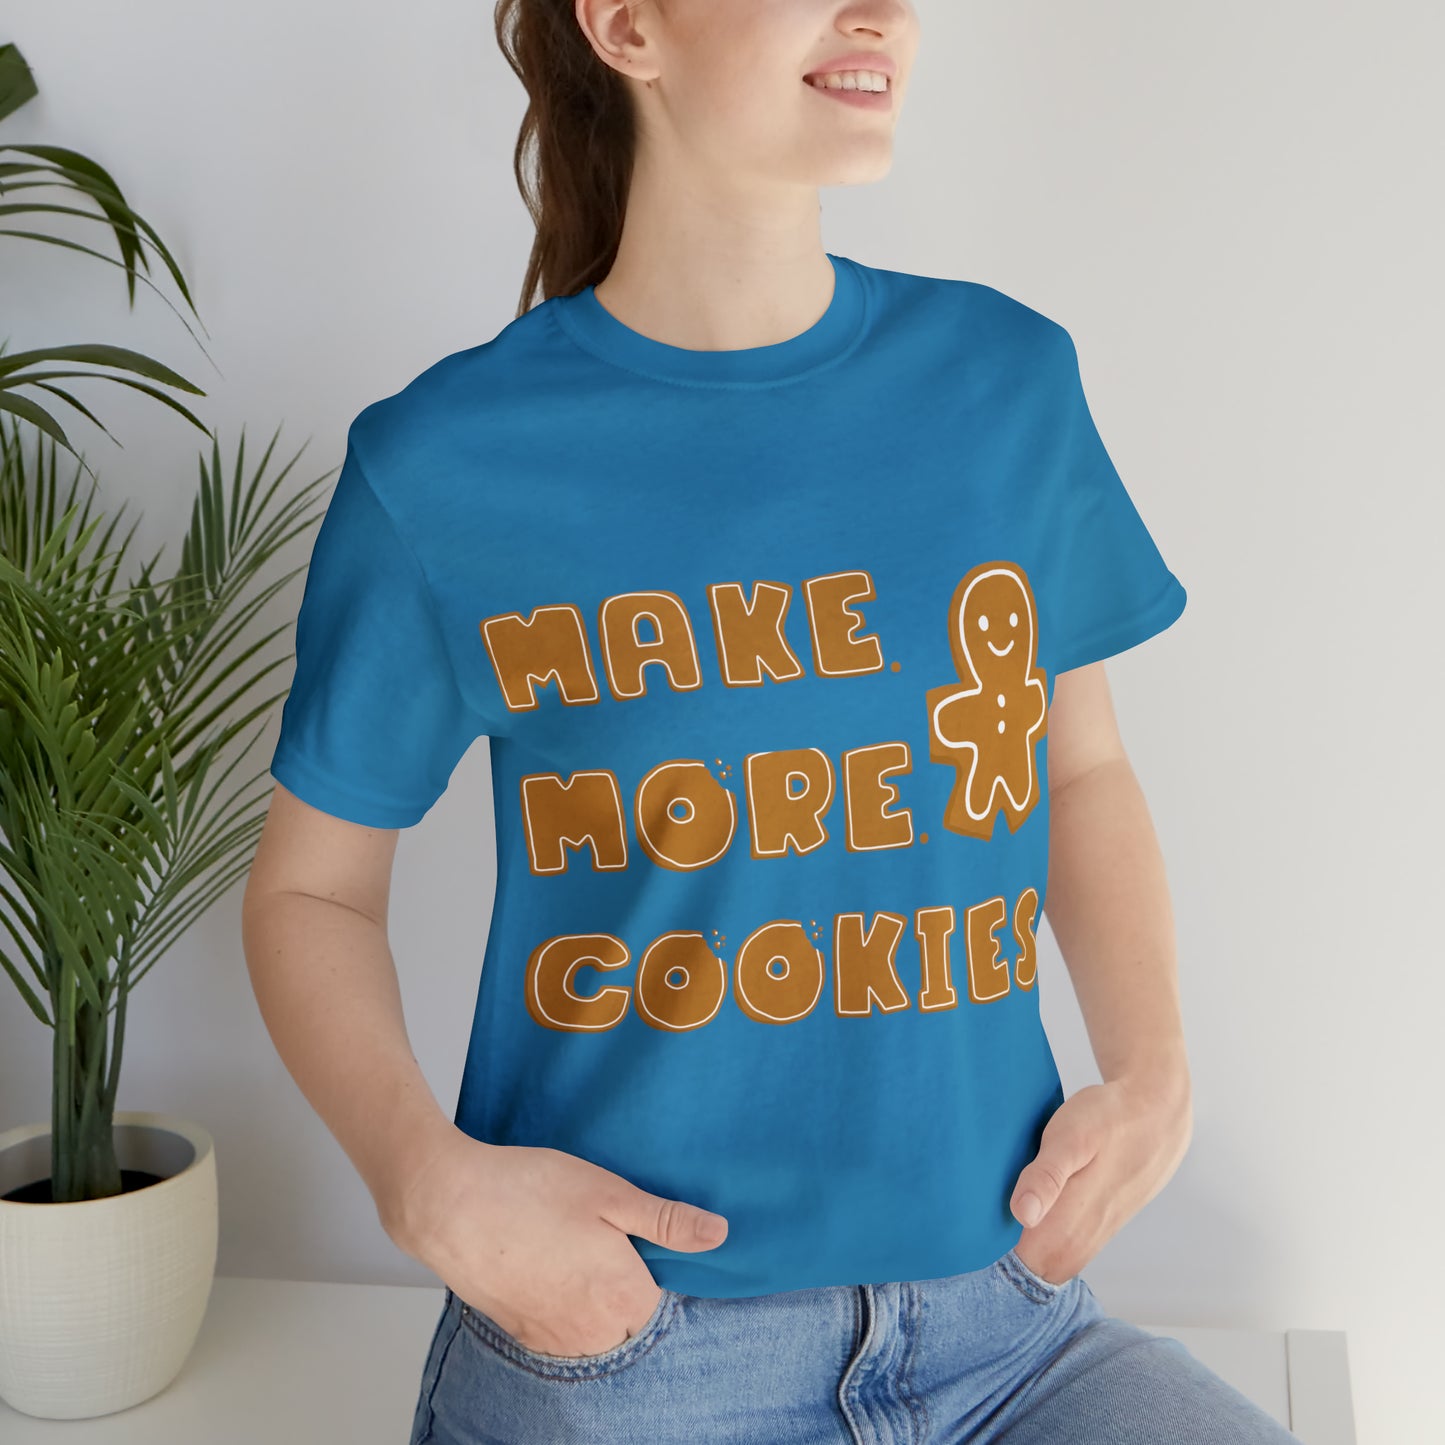 Baking, Make More Cookies, Gingerbread- Adult, Full Size Image, Regular Fit, Soft Cotton, T-shirt